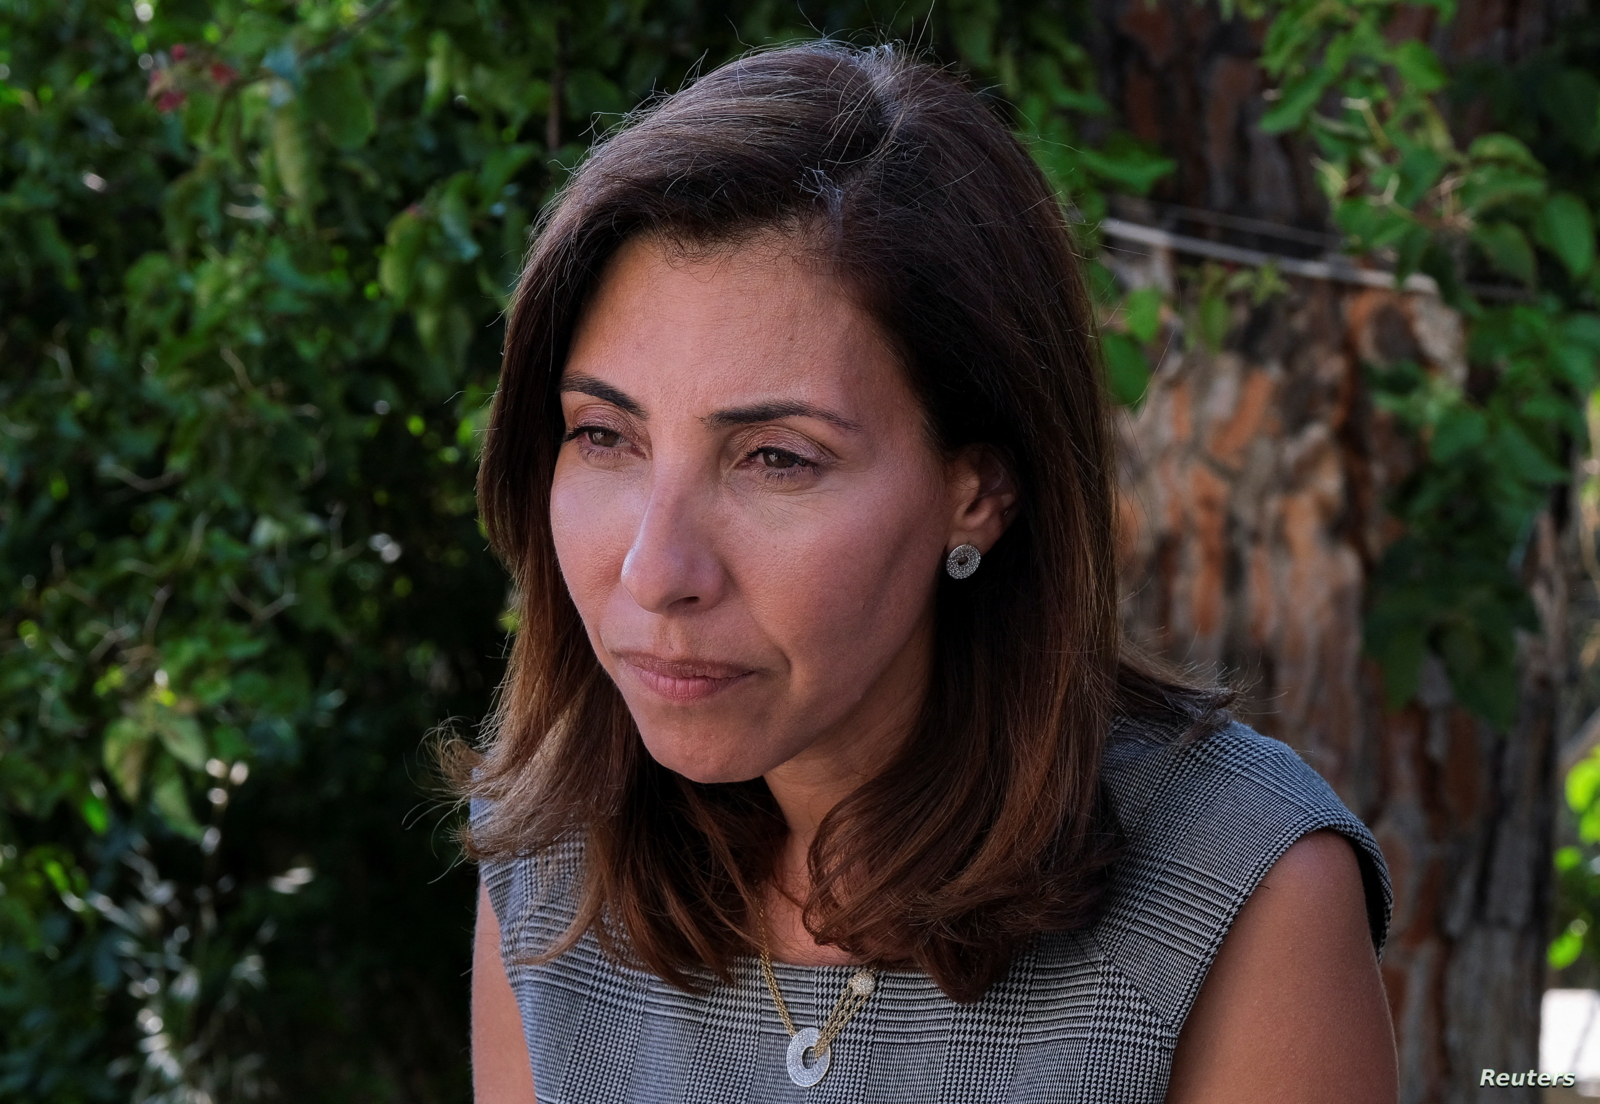 Halime El Kaakour, a newly elected Lebanese MP, attends an interview with Reuters in Mechref